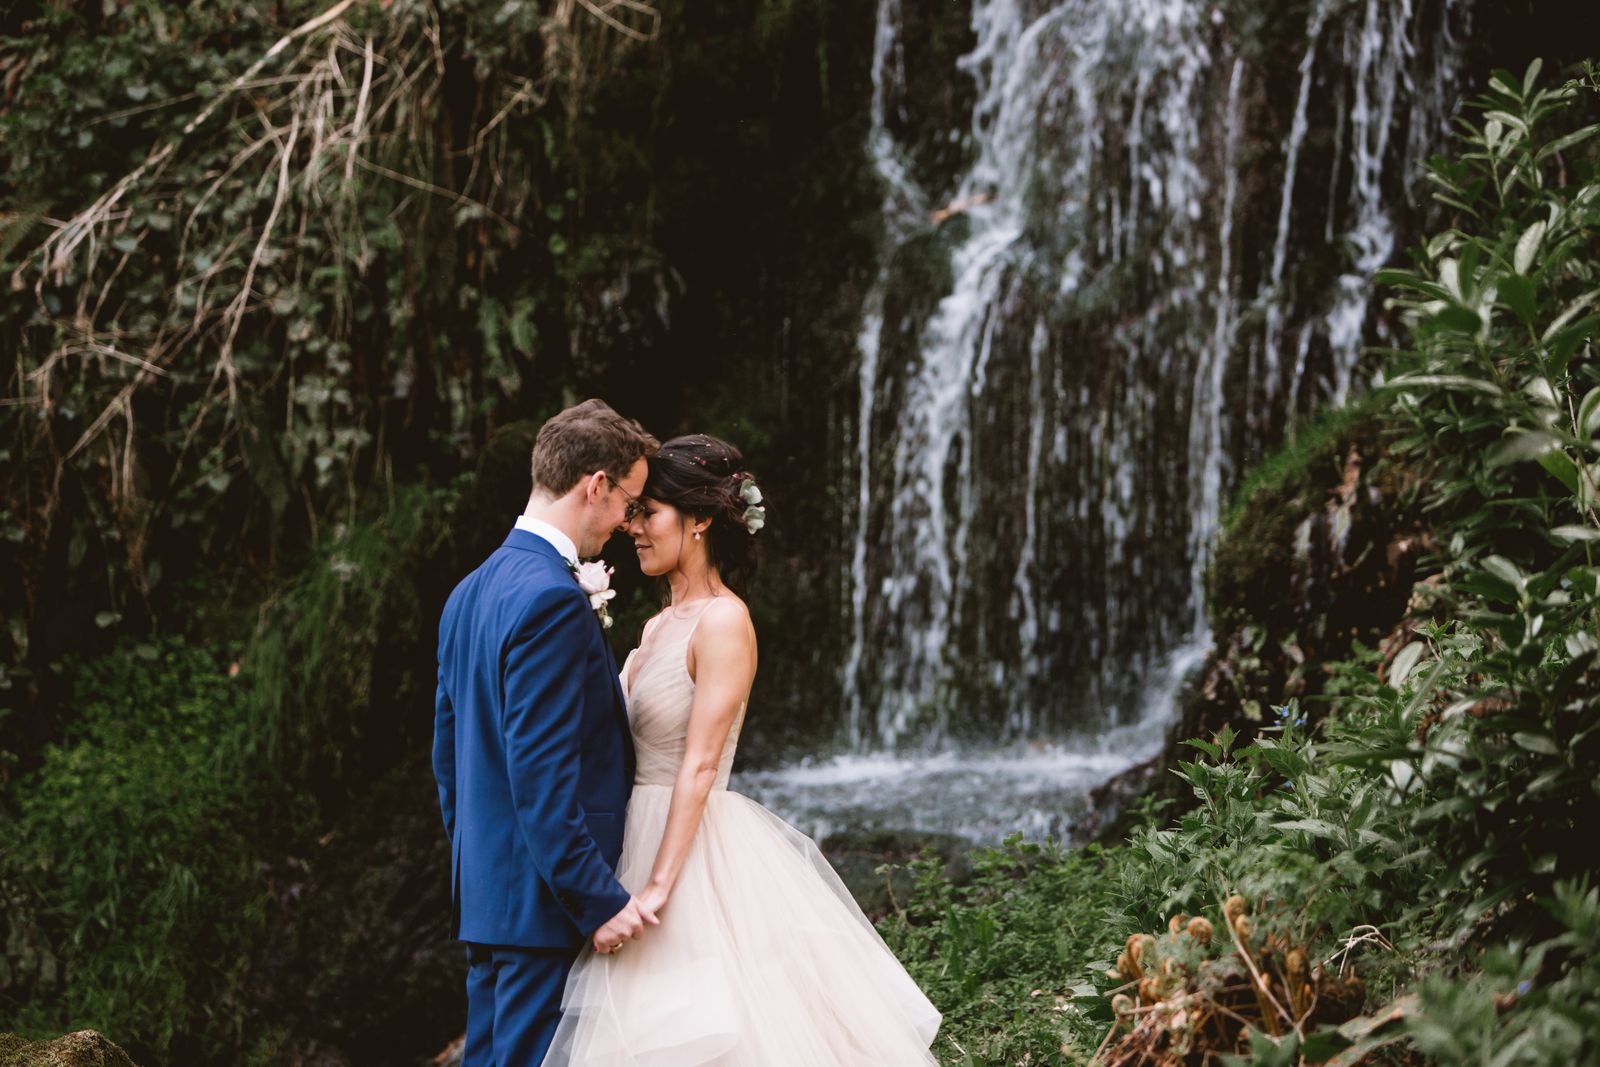 Bride and groom pose together beside the waterfall at Hestercombe Gardens